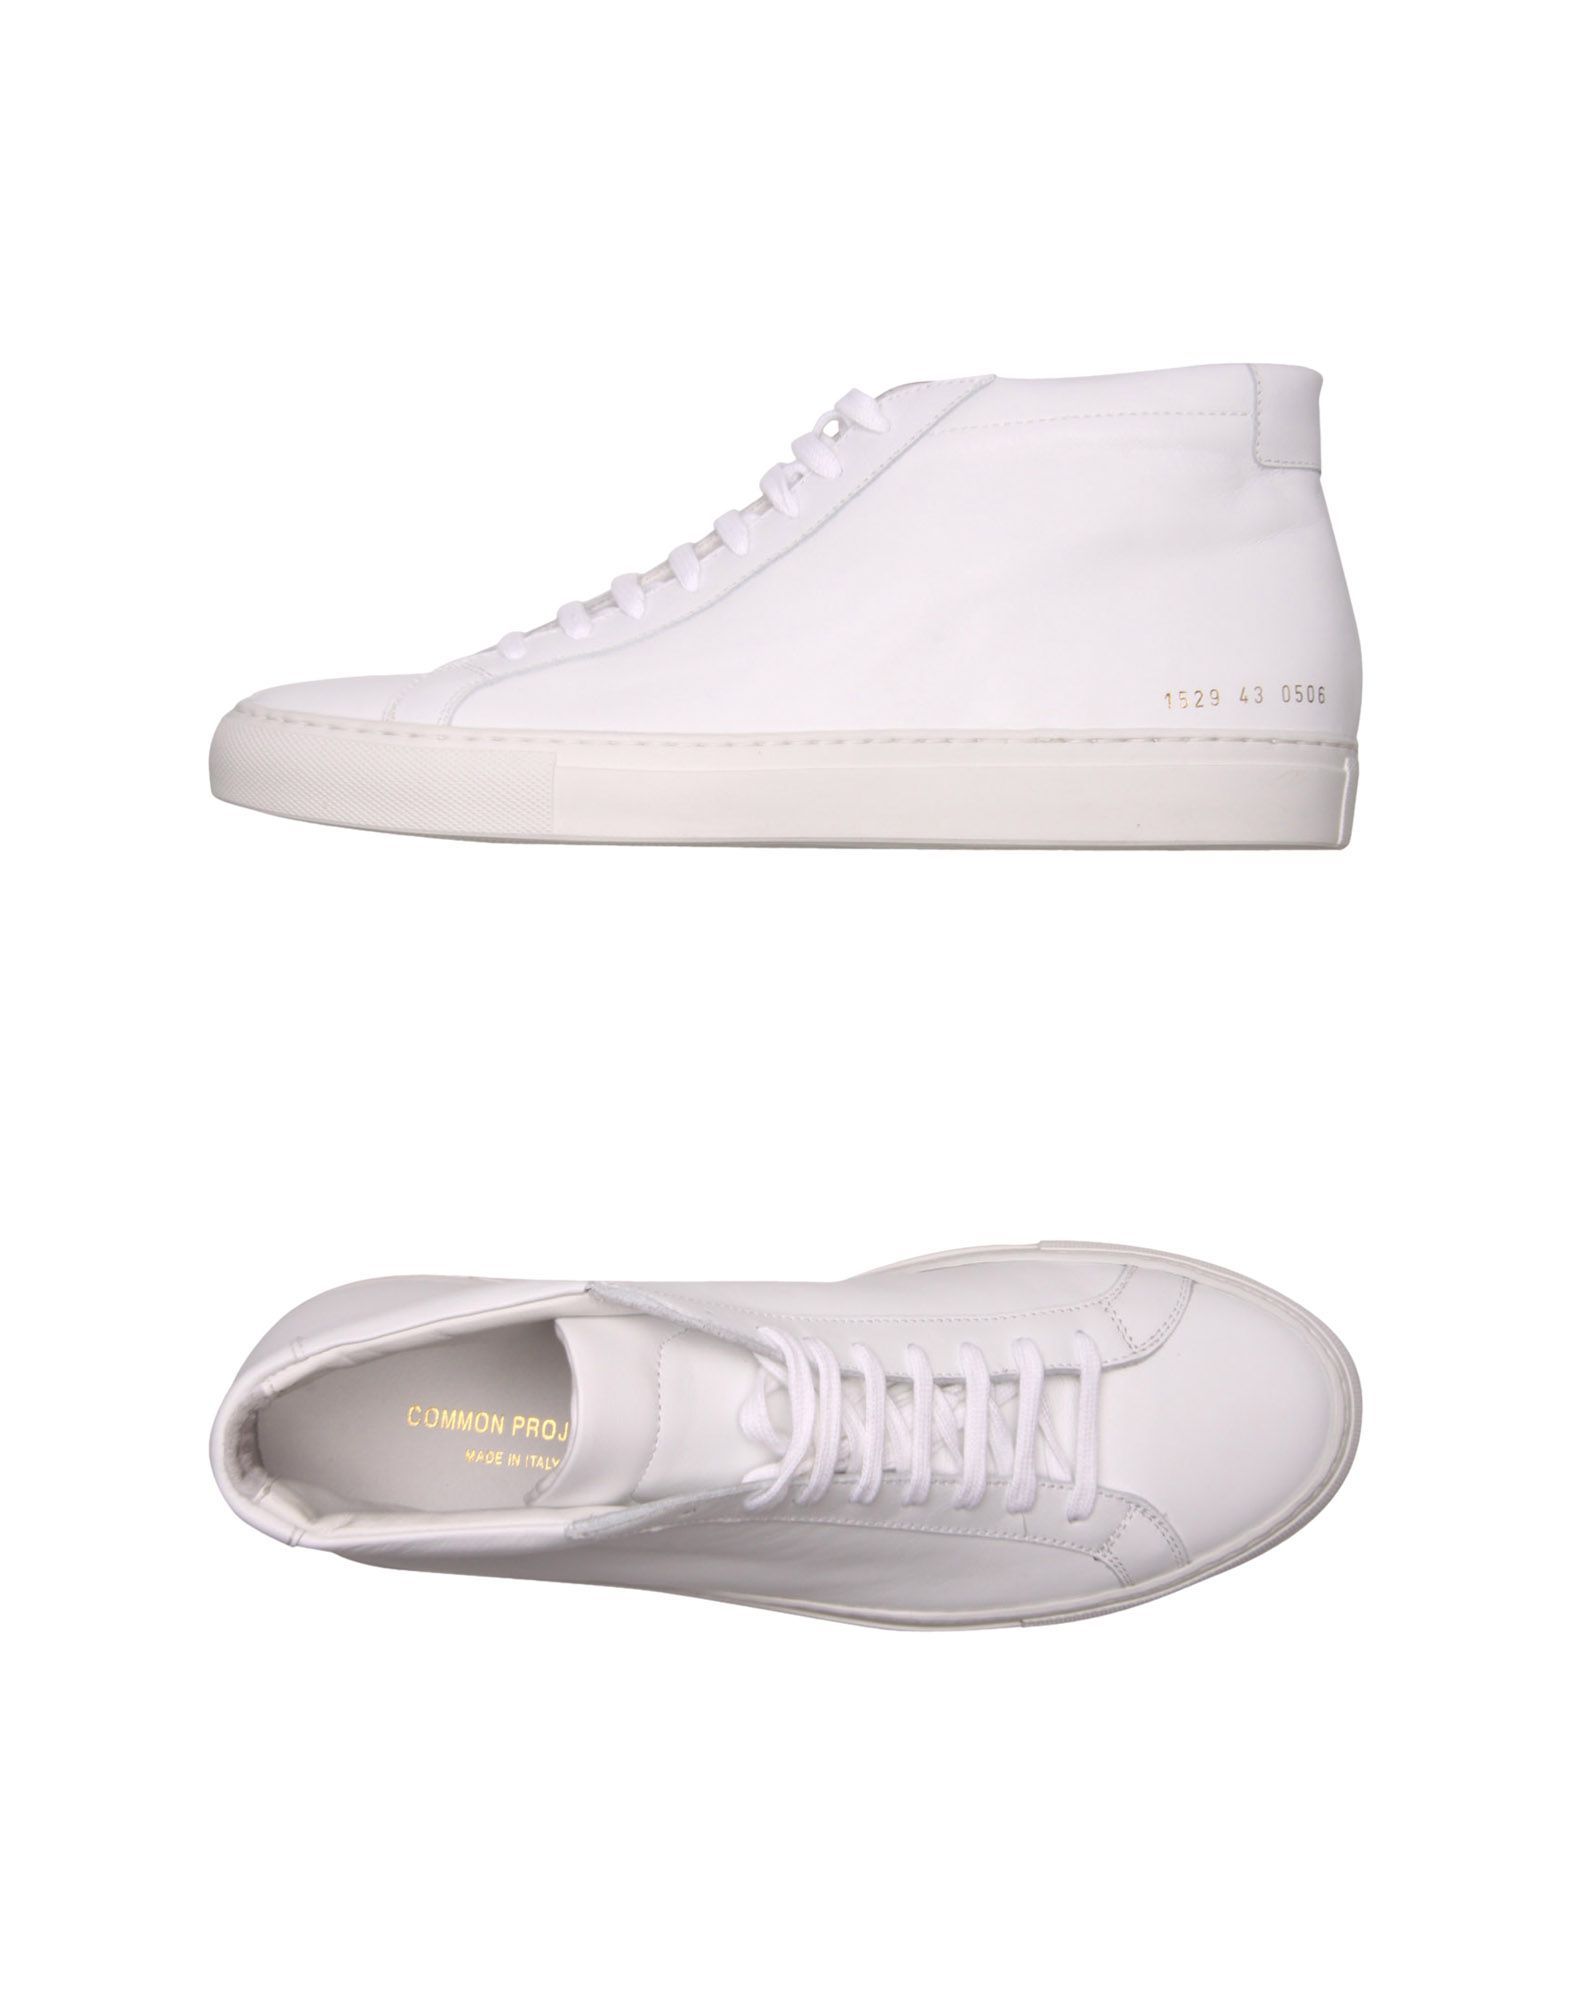 COMMON PROJECTS High-top sneakers | YOOX (US)